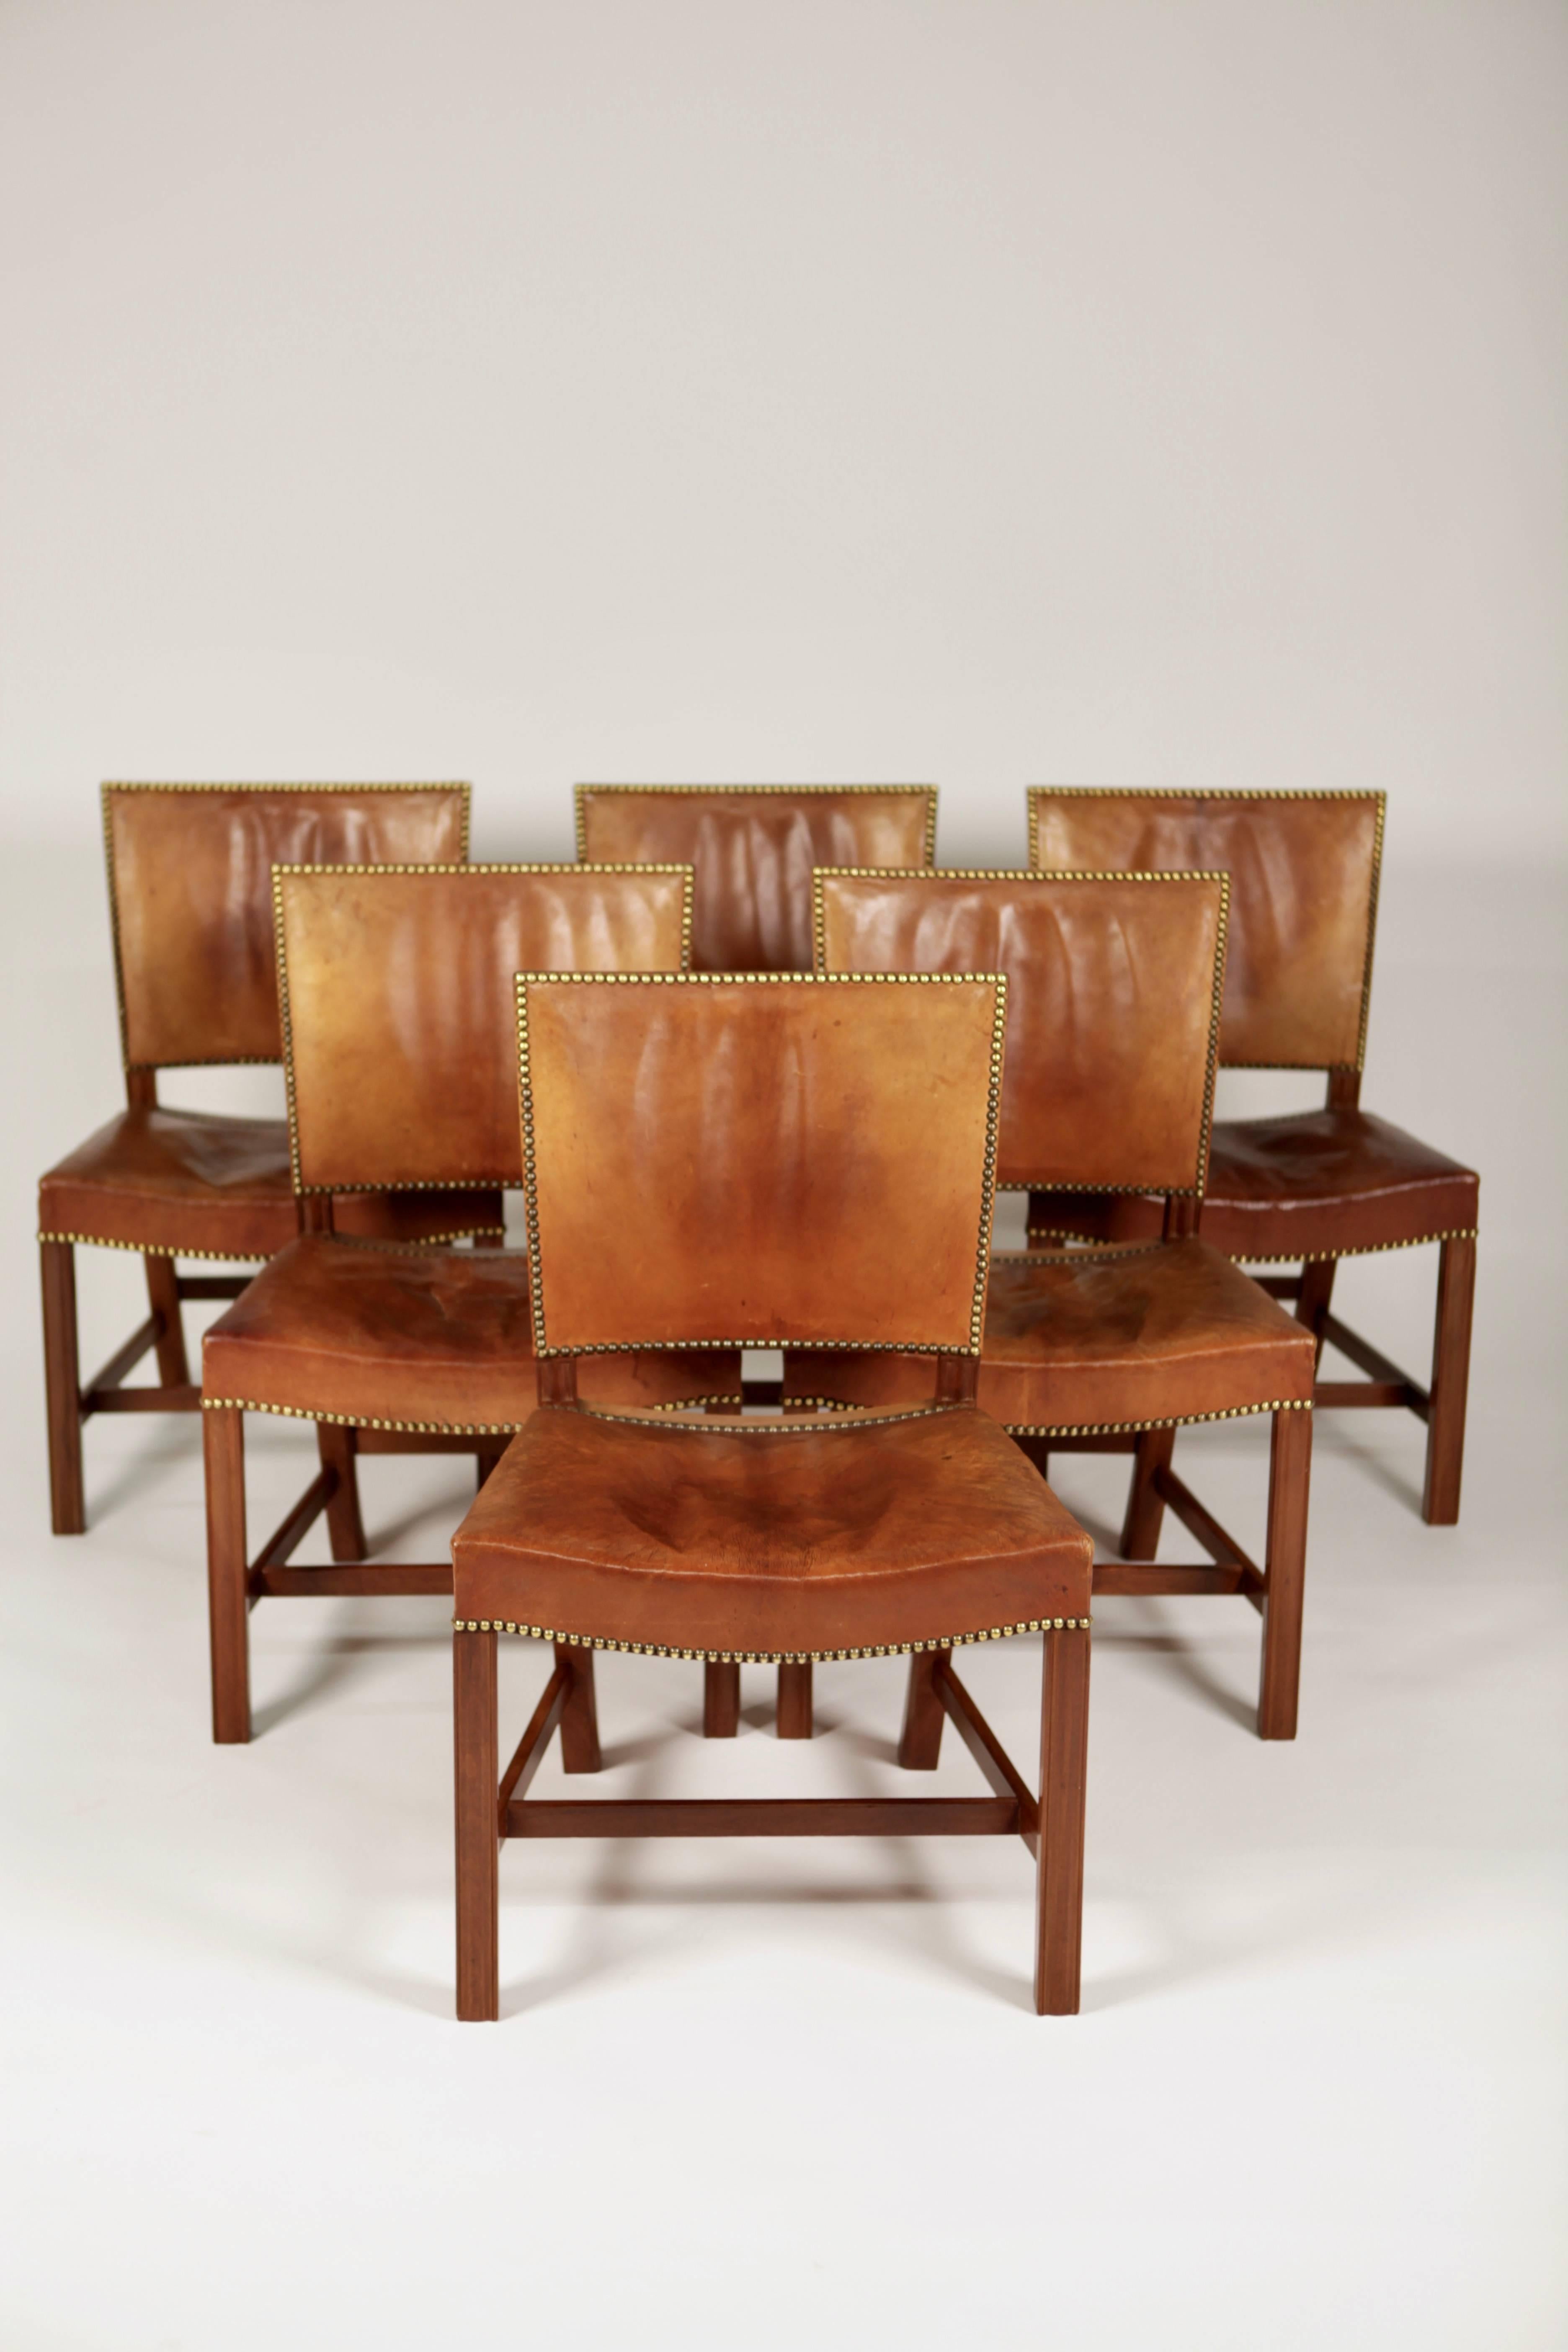 Kaare Klint,
A set of six 'Barcelona' dining chairs. Designed 1927
This set is manufactured 1932, in original, excellent condition, made of Cuban mahogany, Niger leather and brass nails.
Model 3758.
Executed by cabinetmakers Rud. Rasmussen A/S,